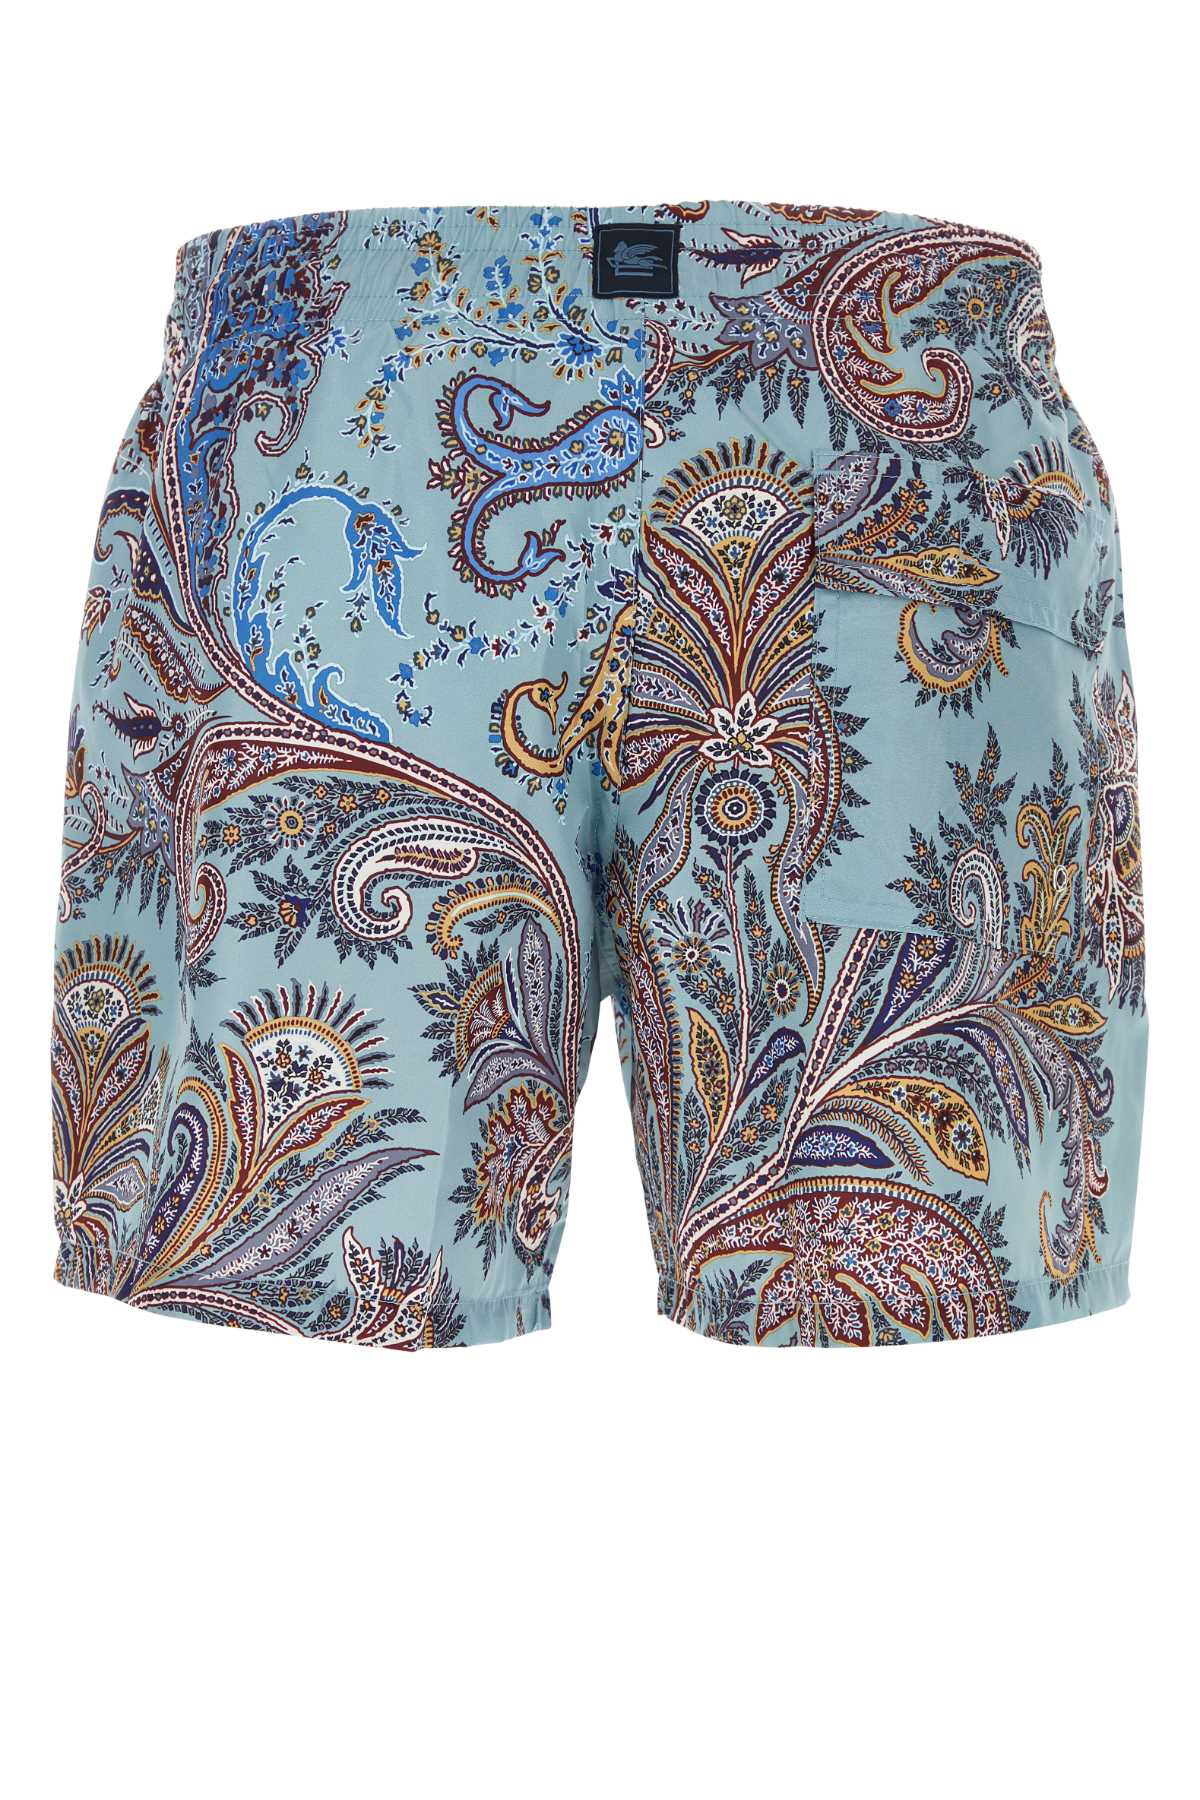 ETRO PRINTED POLYESTER SWIMMING SHORTS